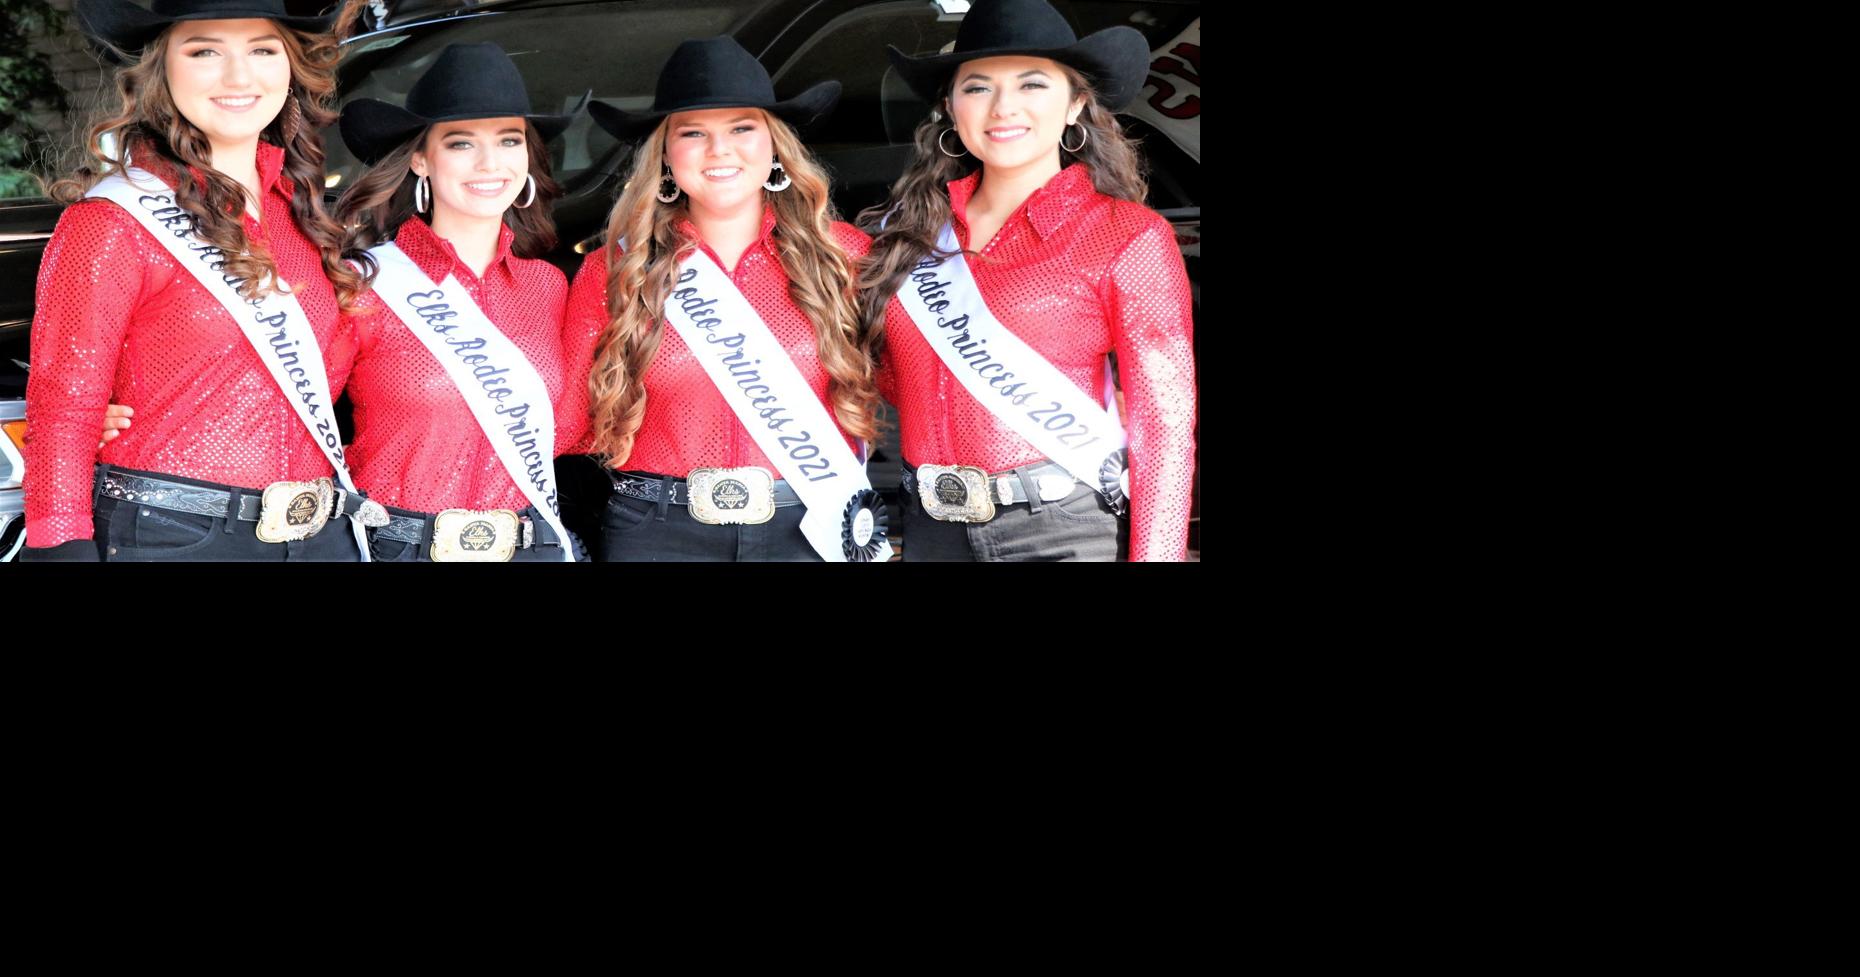 Elks Rodeo Queen crowning will highlight Friday night performances